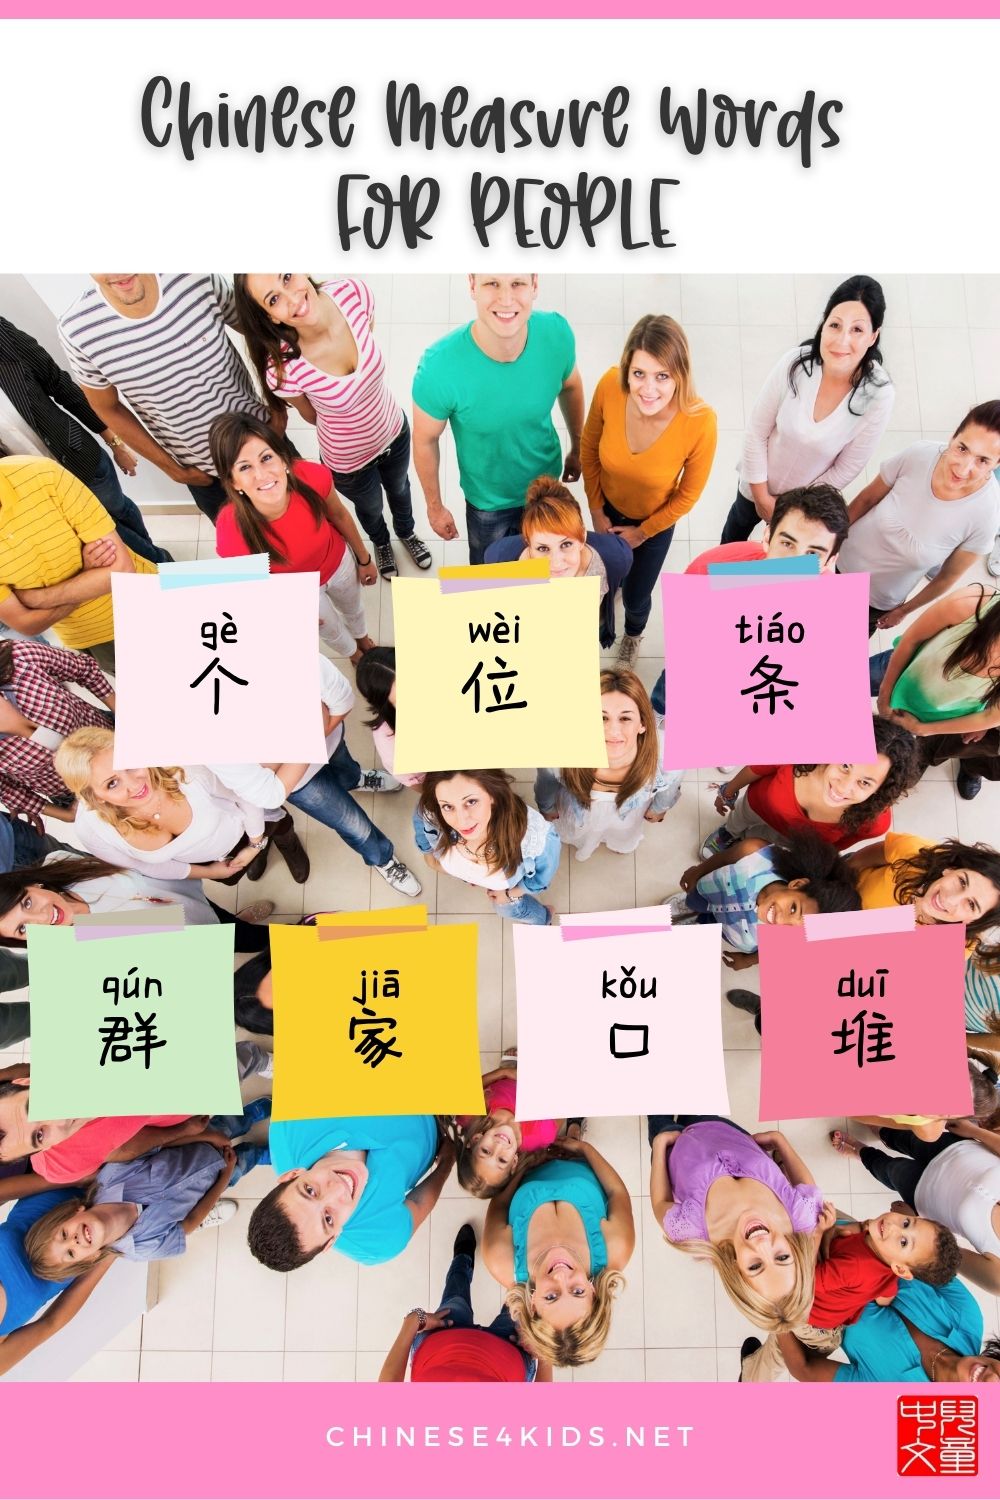 Learn Chinese measure words for people Montessori 3-part flashcards #Chinese4kids #Chineseflashcards #learnChinese #mandarinChinese #measurewords